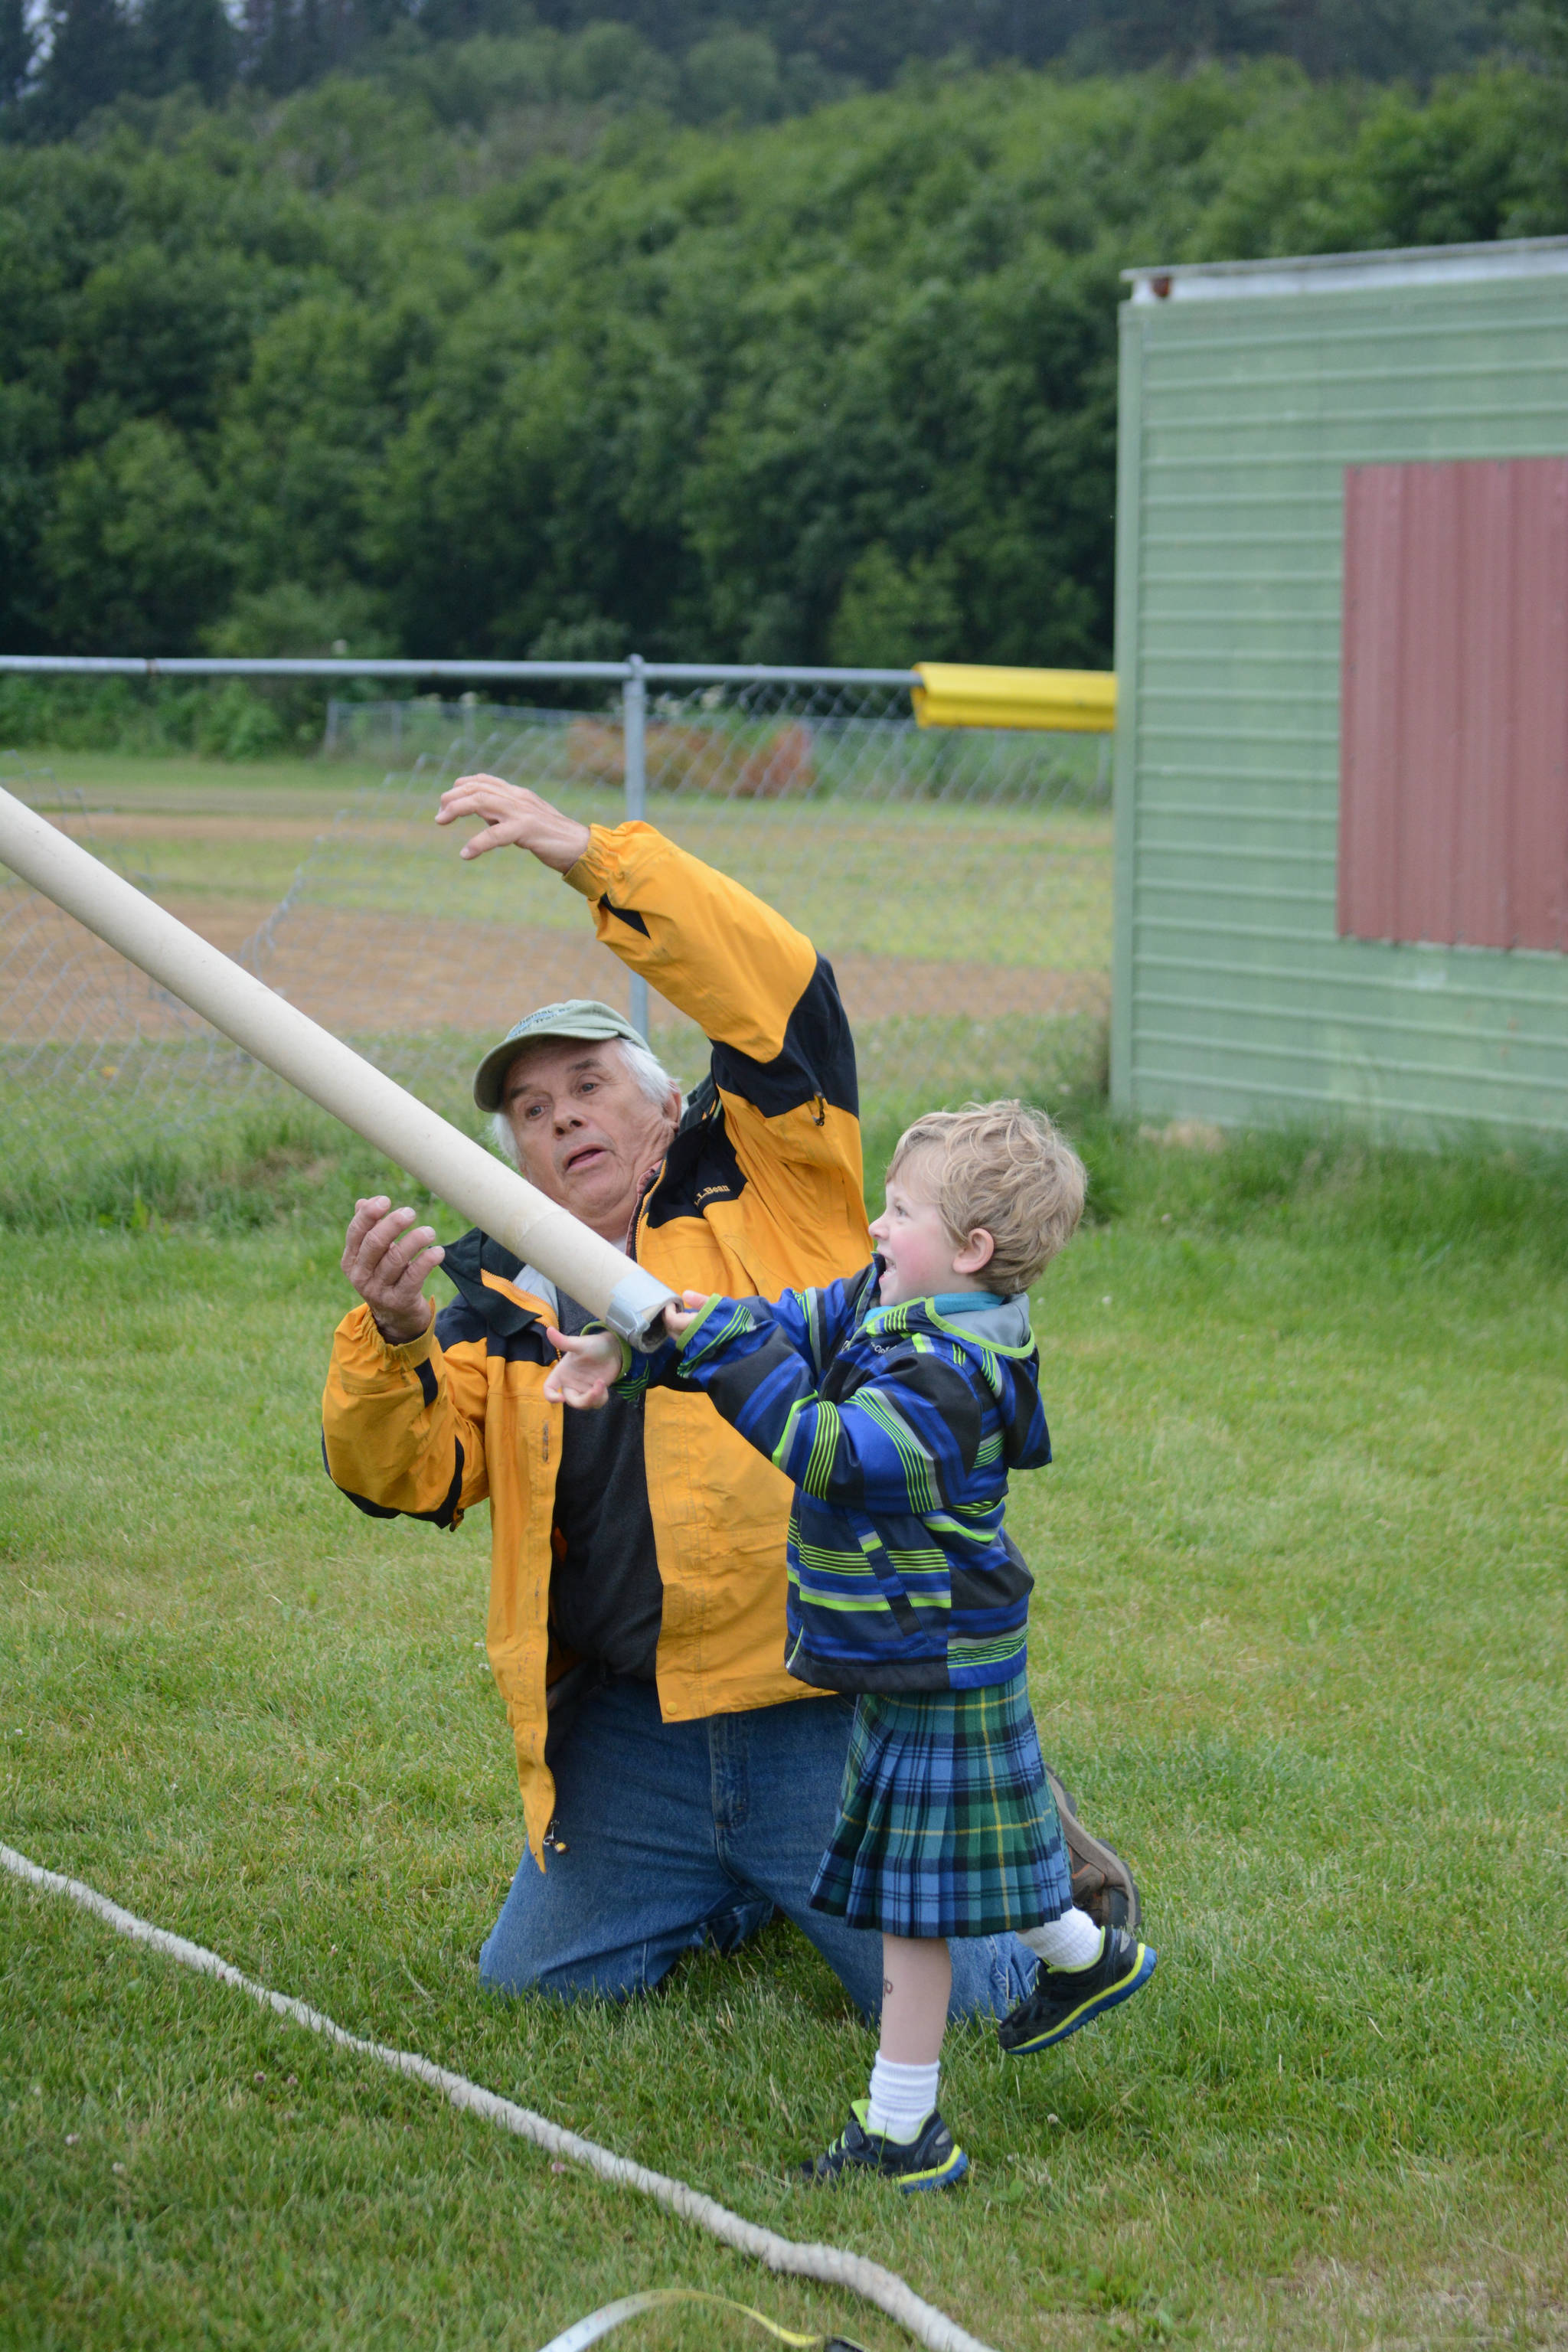 Torrin Bartlett tosses the caber (a cardboard tube) during the children’s events in the July 3, 2017 Kachemak Bay Scottish Club Games at Karen Hornaday Park as Dave Brann, left, watches. (Photo by Michael Armstrong/Homer News)